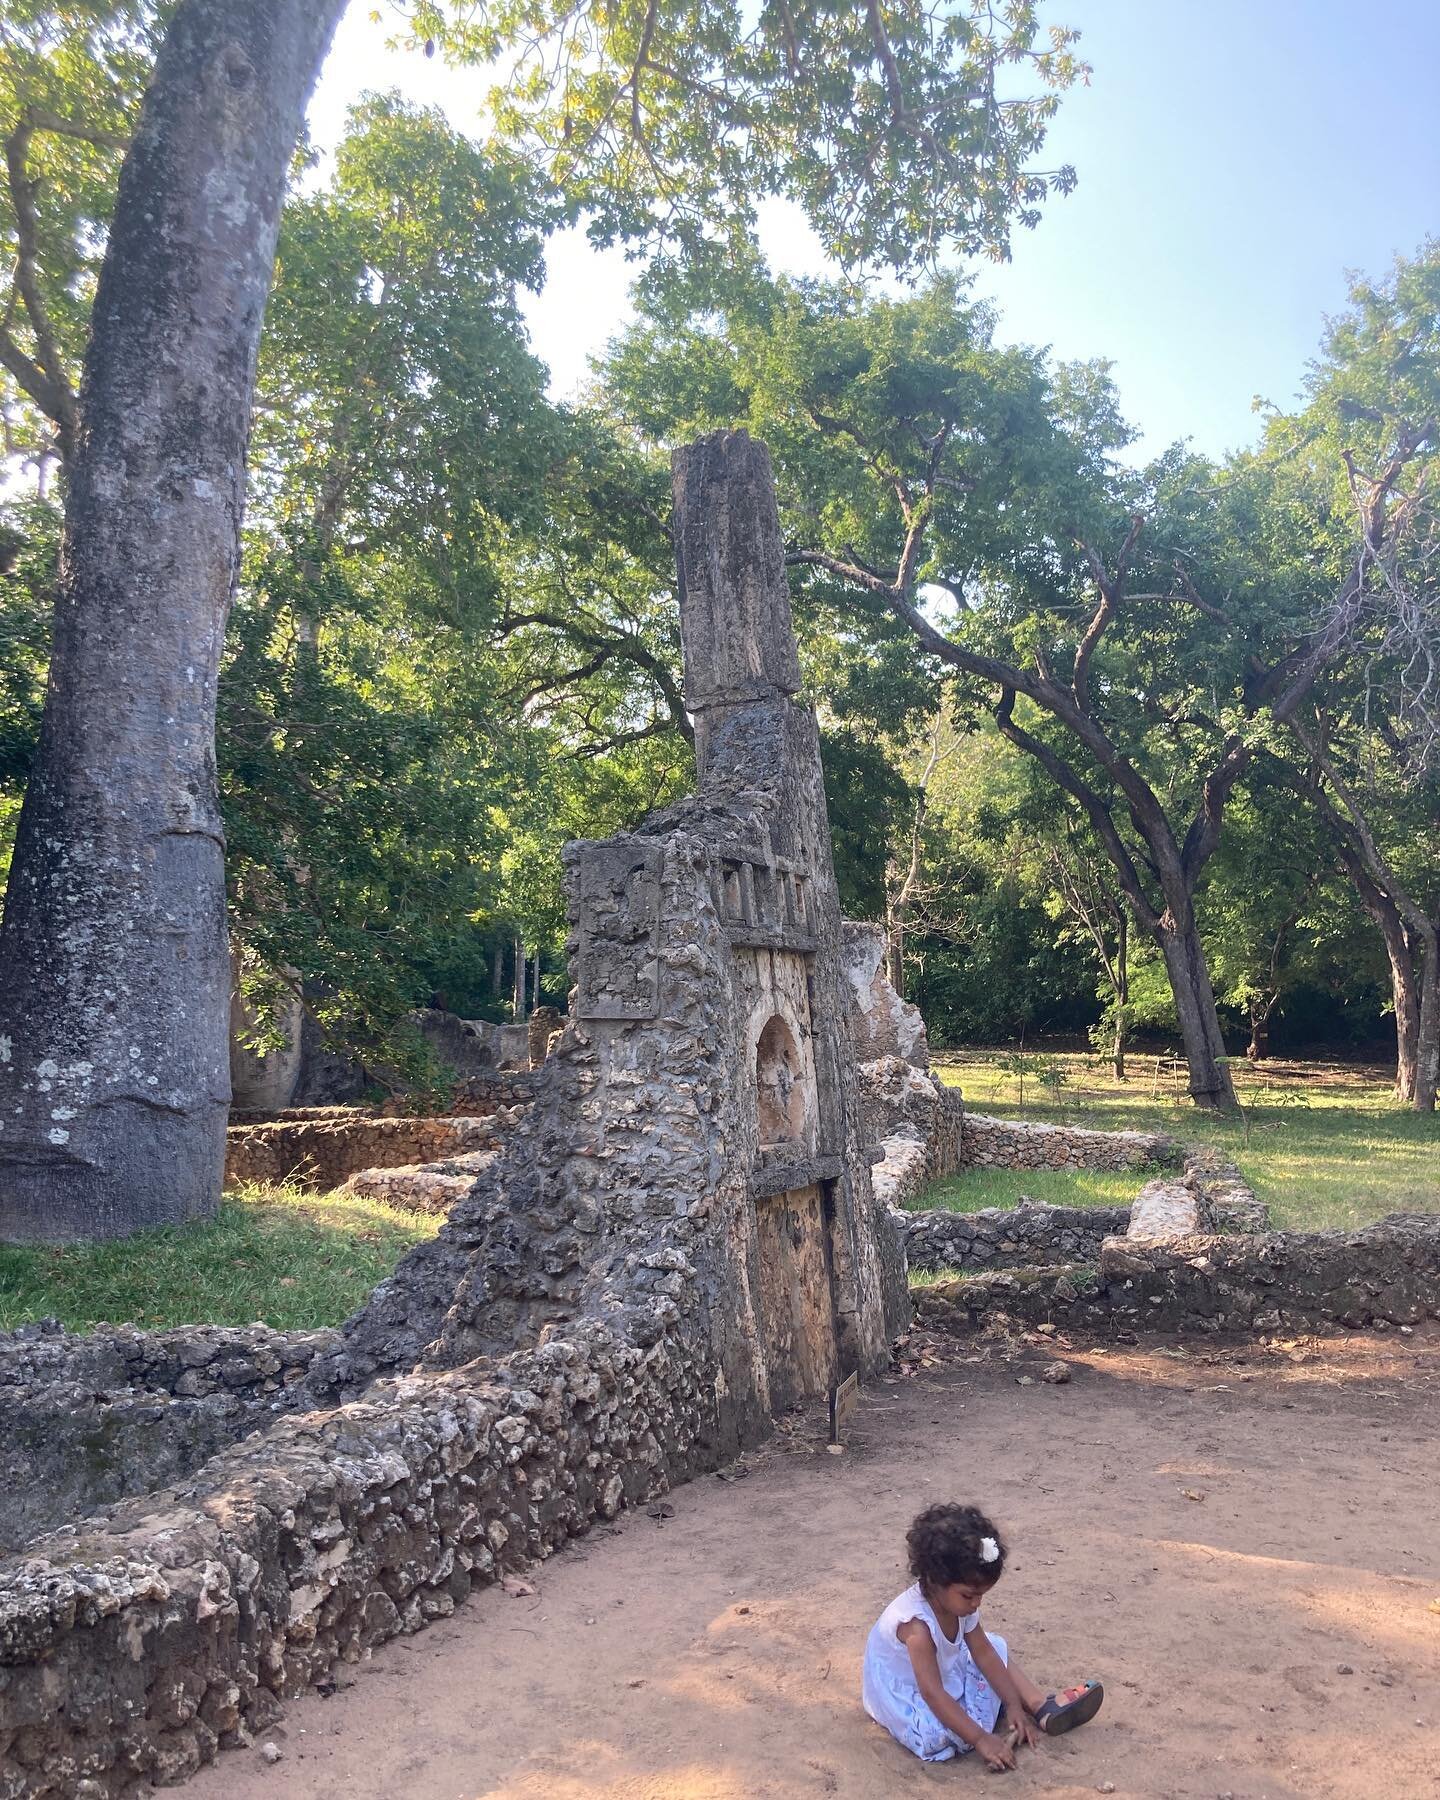 GEDE 🌳

The beautiful Gede ruins, a 12th century medieval Swahili coastal settlement that was mysteriously abandoned in the 16th century (our guide said there was a pandemic 😬).

The ruins are overgrown with stunning indigenous forest trees, includ